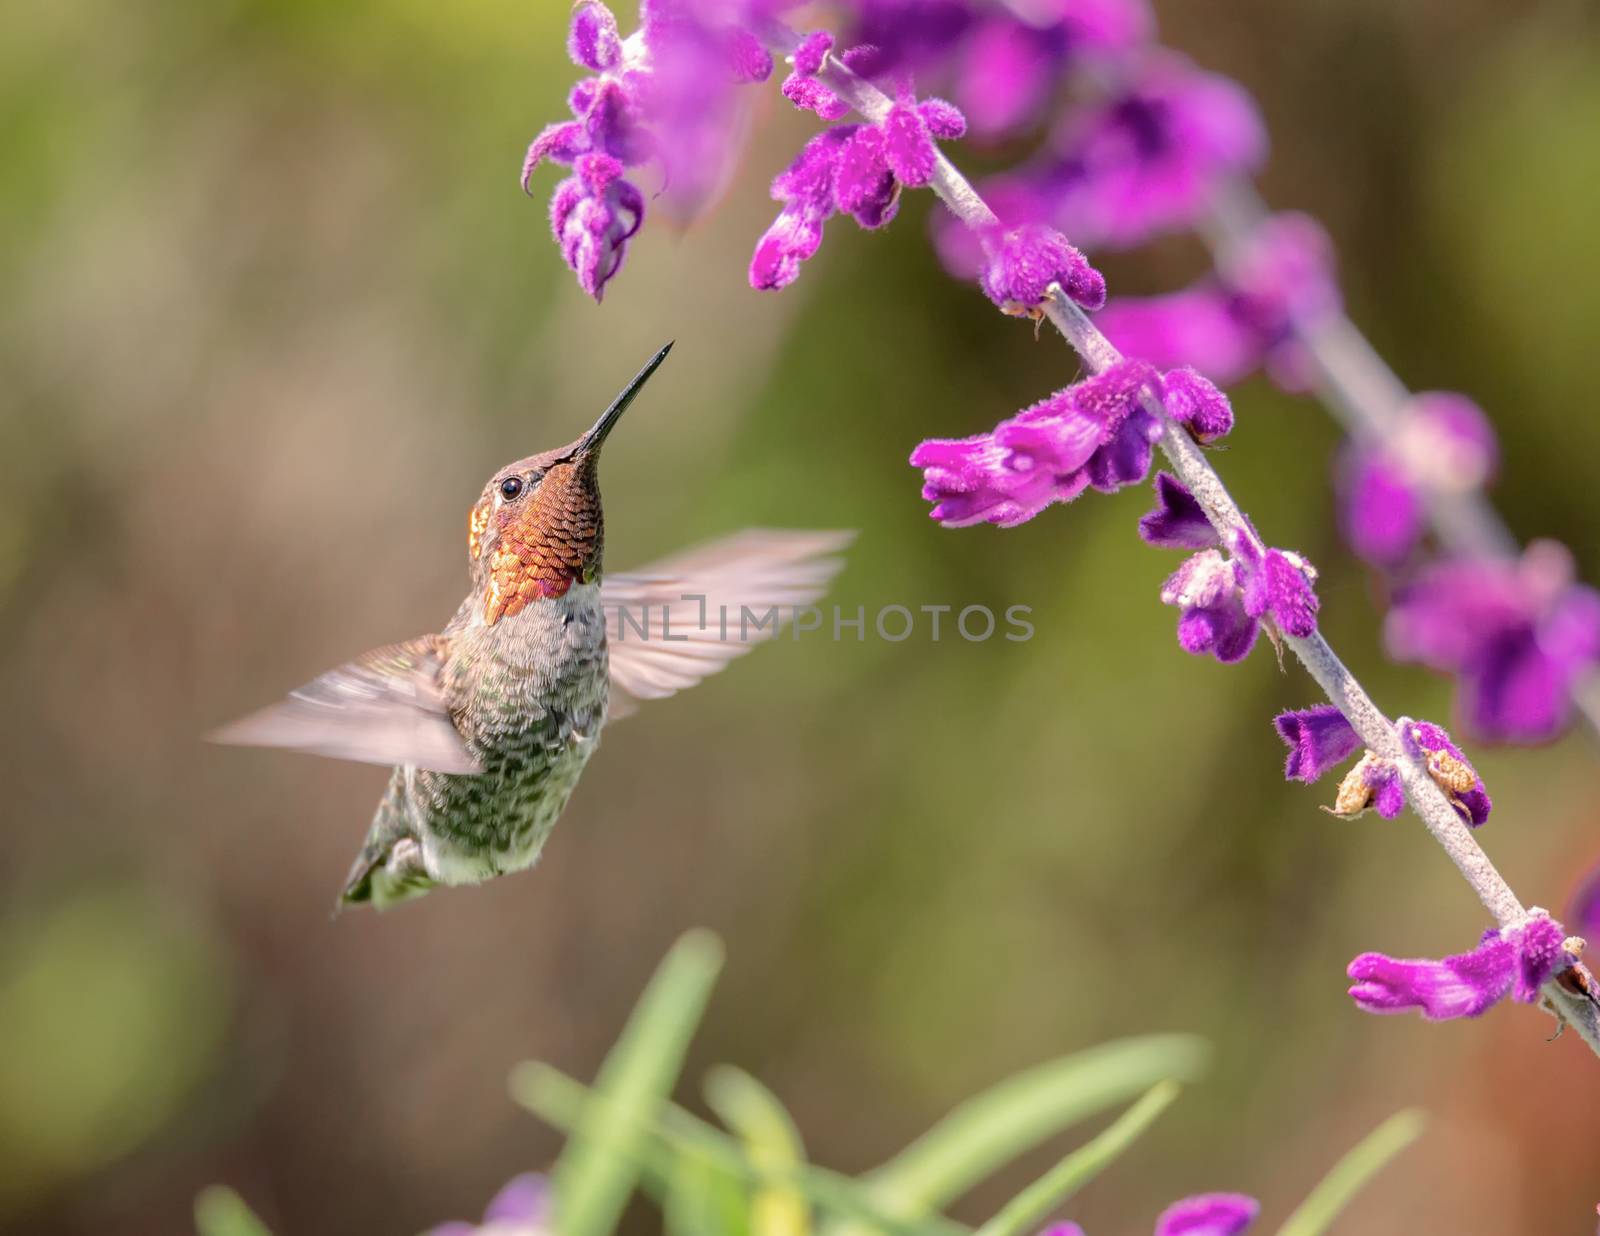 Anna's Hummingbird in Flight with Purple Flowers by backyard_photography